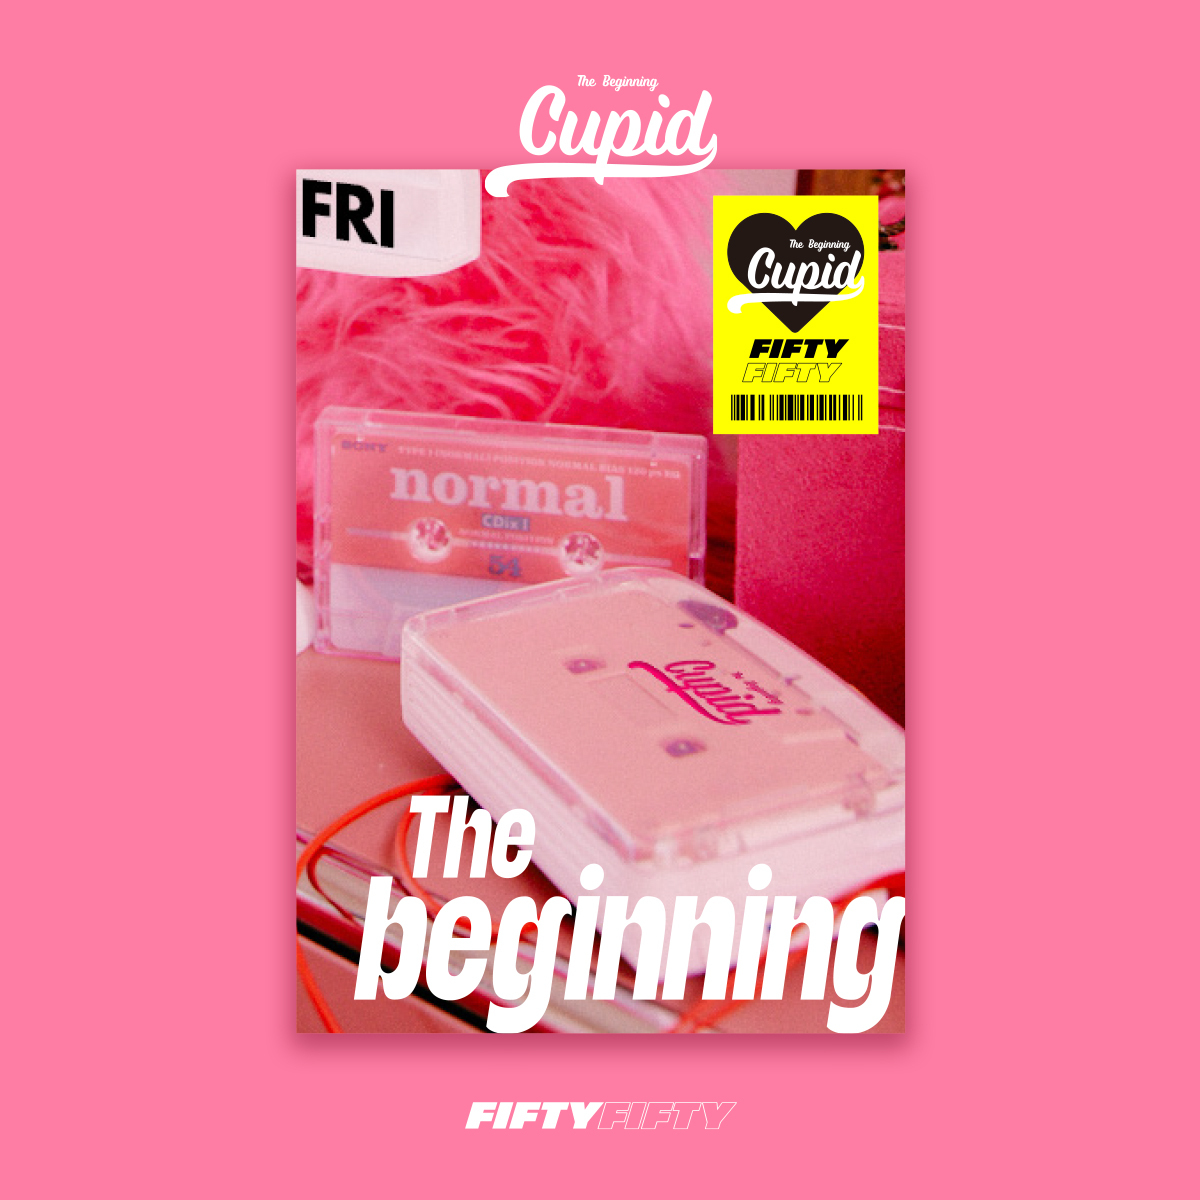 [Off-Line Sign Event] FIFTY FIFTY - The 1st Single Album [The Beginning: Cupid] (NERD Ver.)